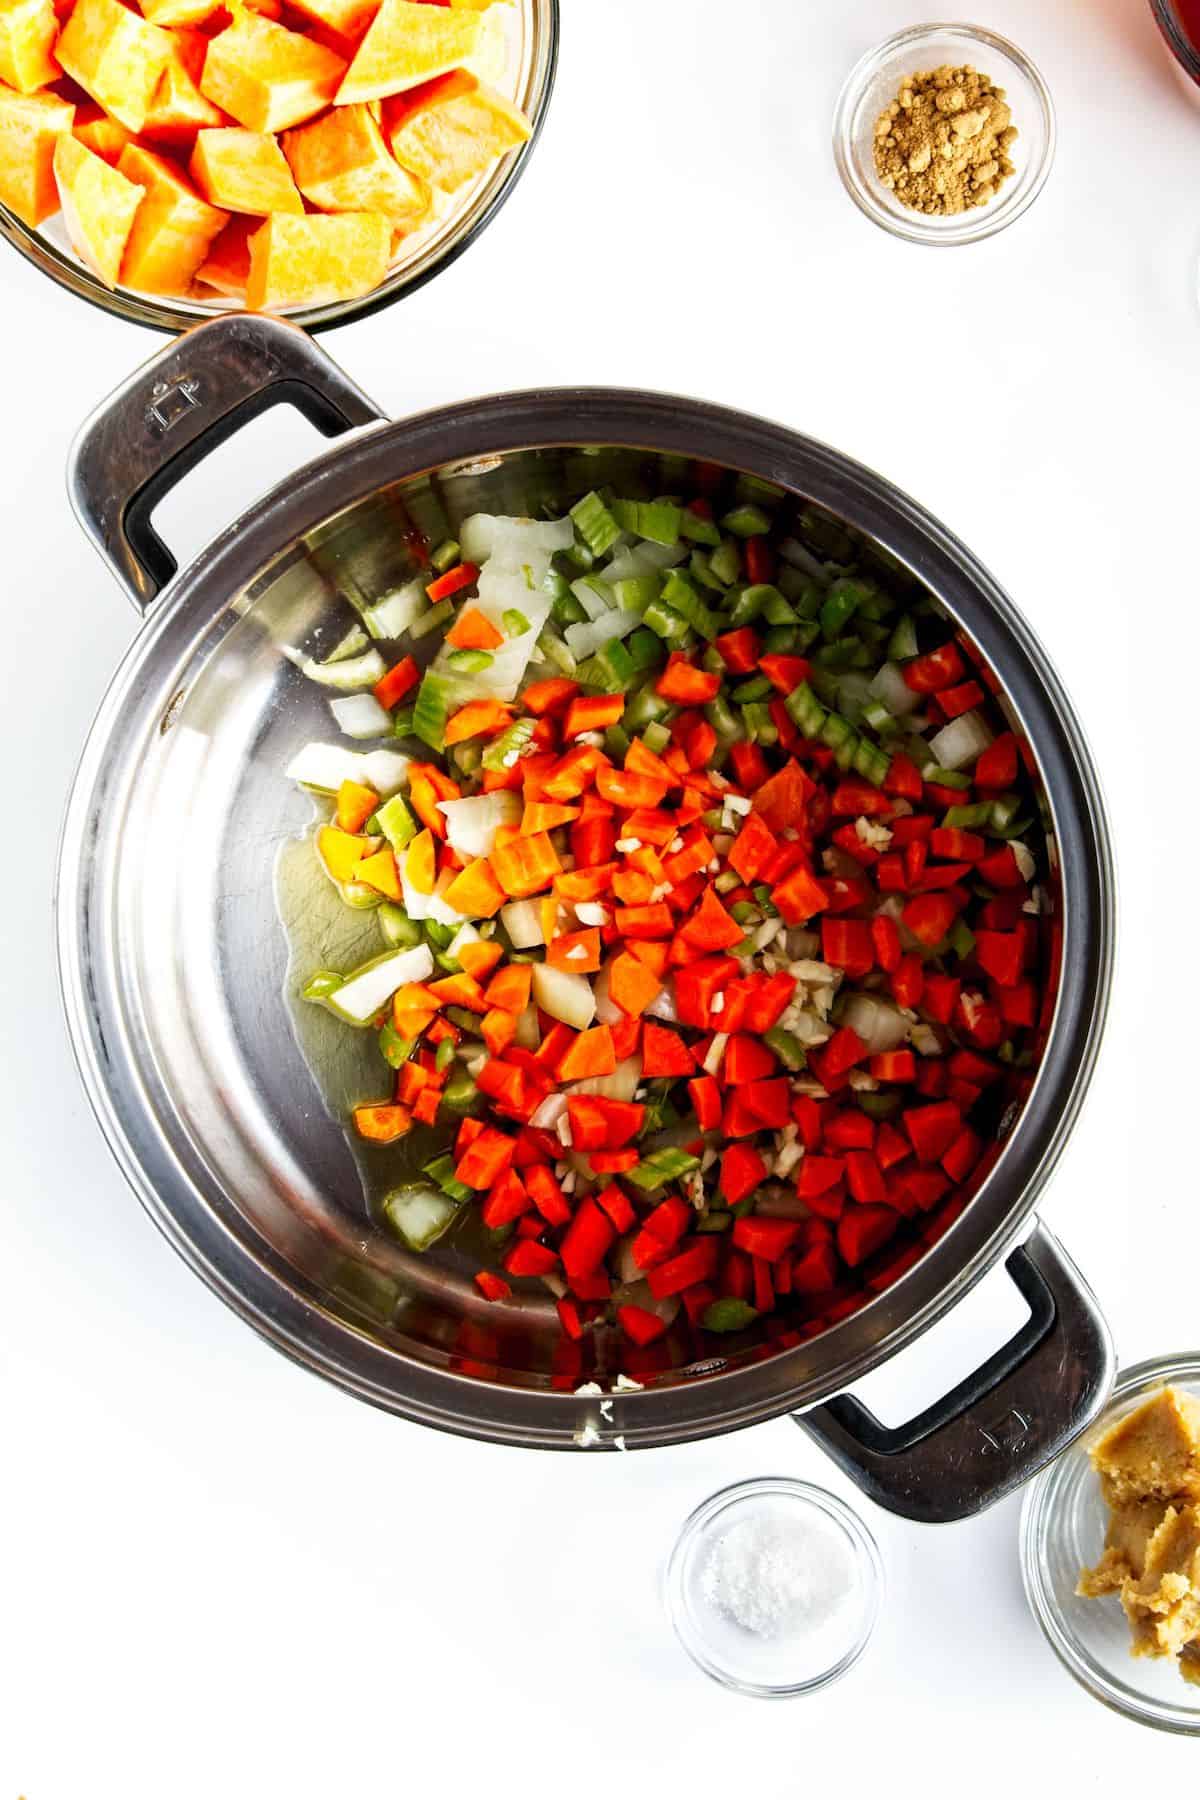 Chopped vegetables in a stock pot with oil.